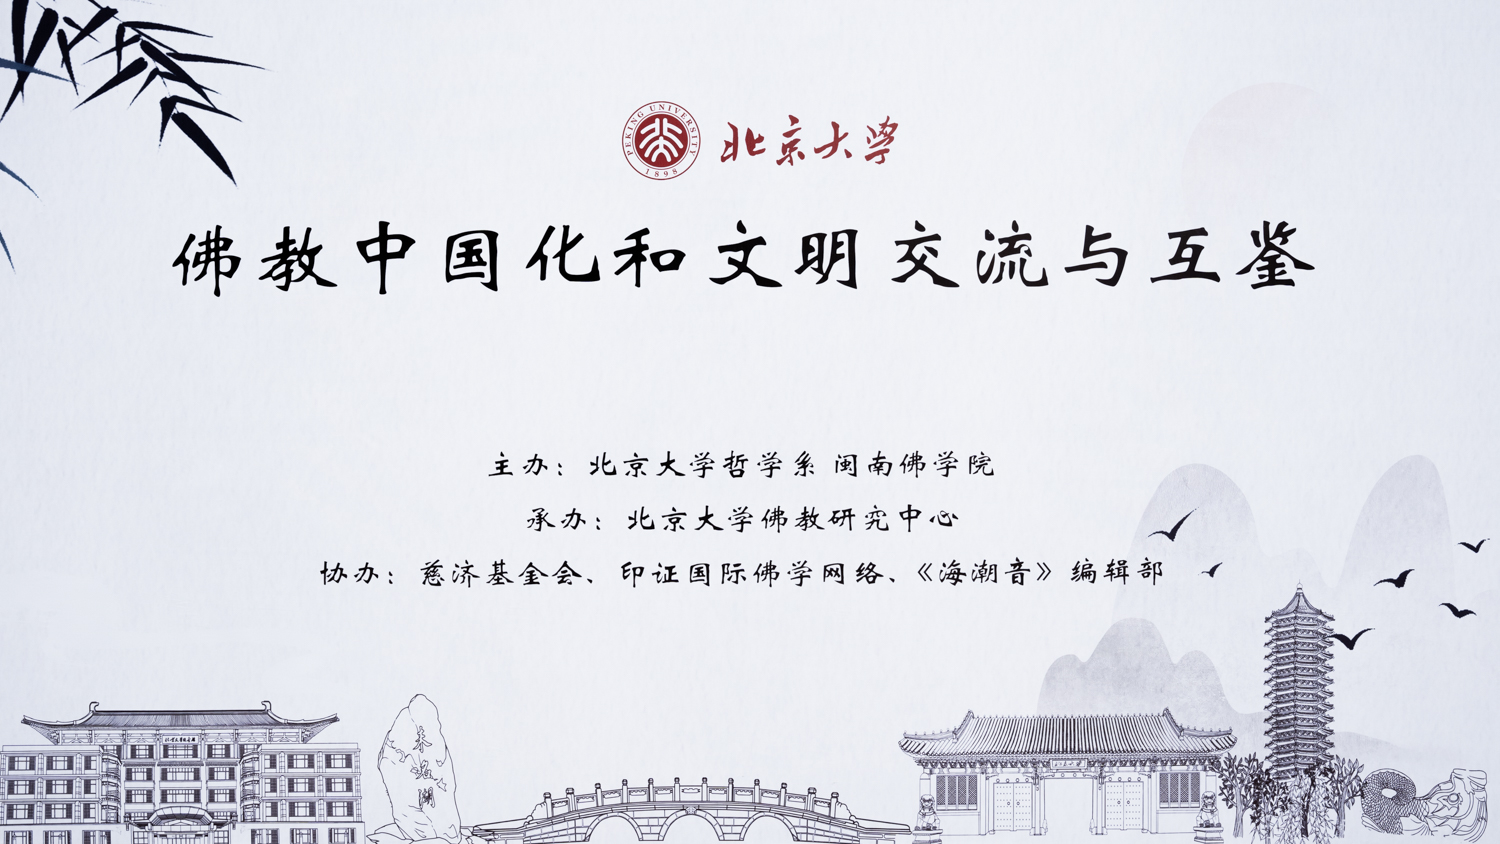  The forum of "Buddhist sinicization and civilization exchange and mutual learning" was opened at Peking University